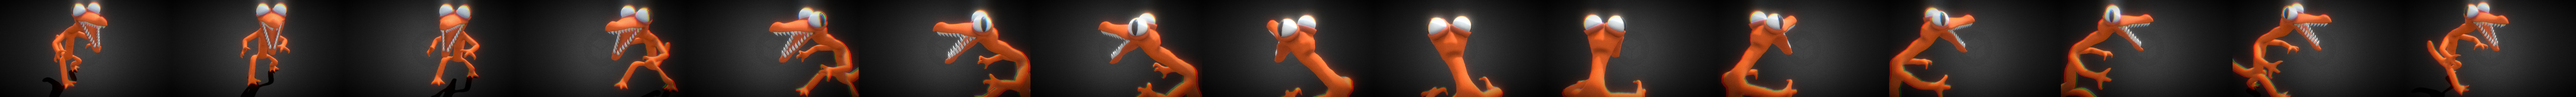 Orange From Rainbow Friends - Download Free 3D model by Poopo192 🎃👻  (@Edward_Johnson_3) [a0d911e]